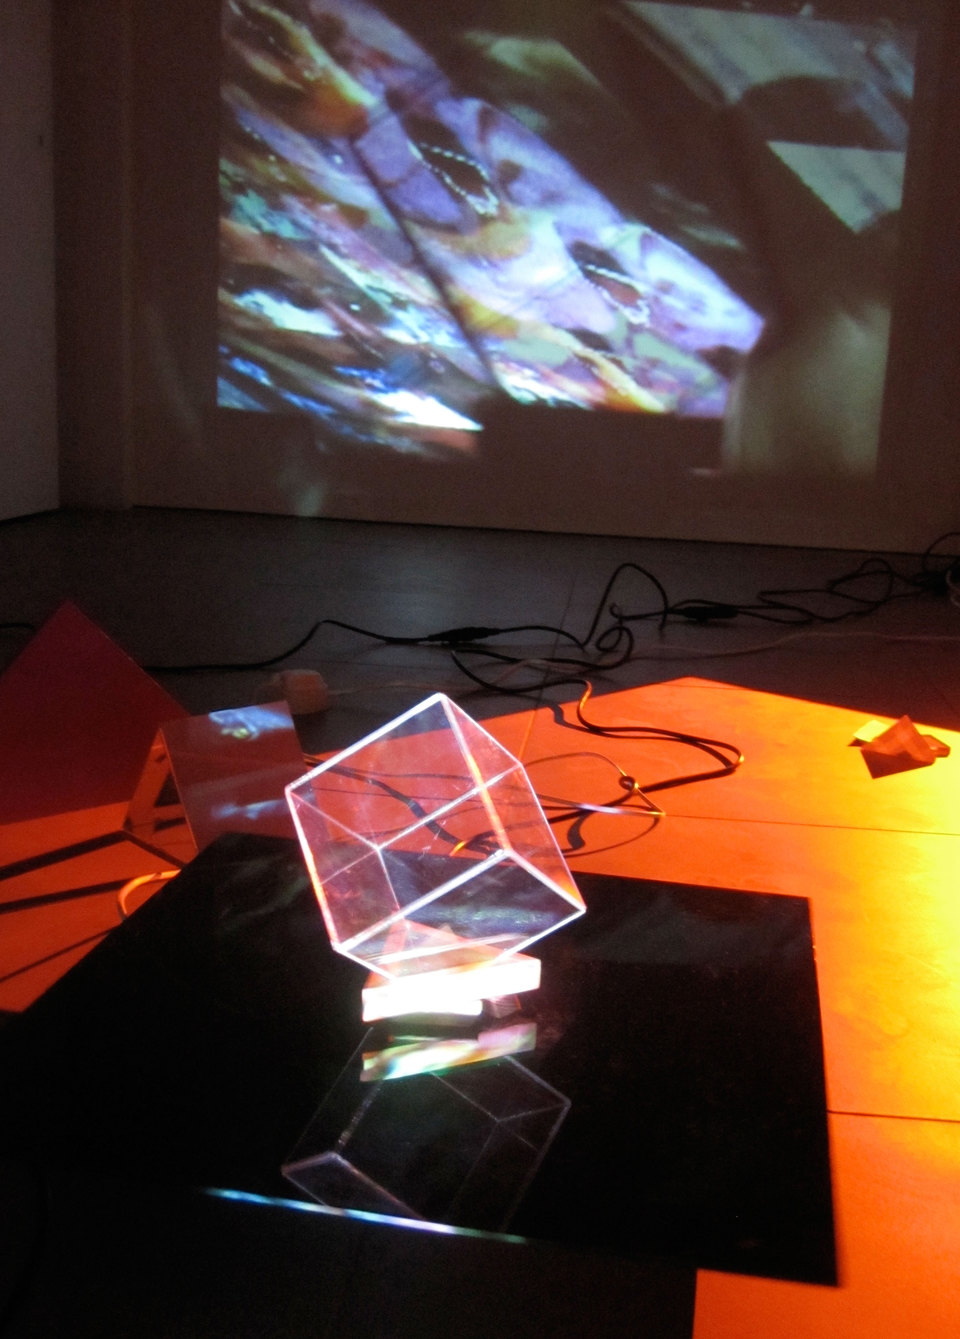 Laura Buckley, Extramundane 2010, Perspex, wood, mirror, motors, music lecterns, 3 video projections, audio (dimensions variable), Cell Project Space